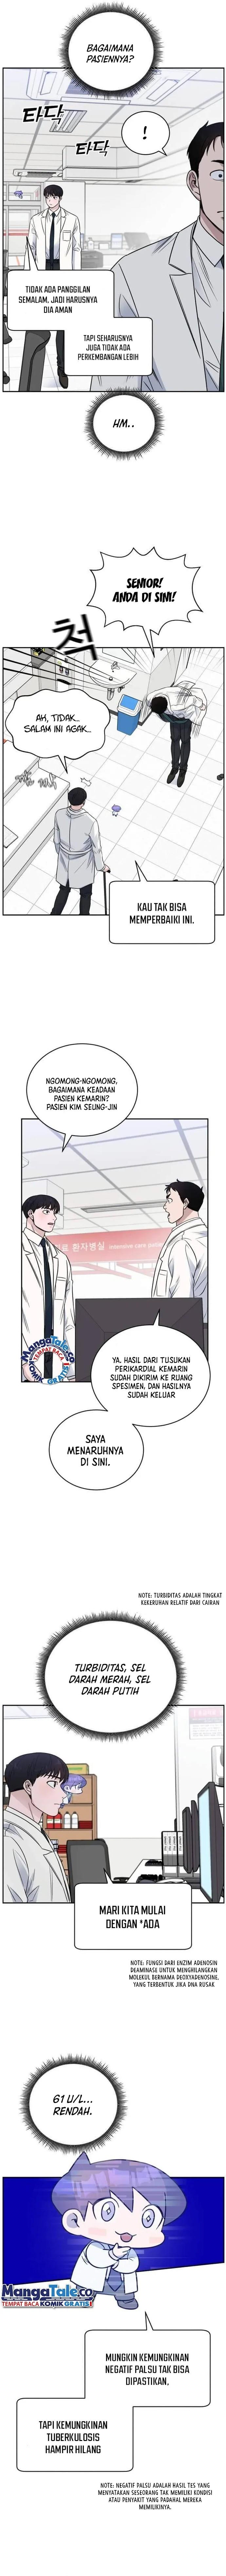 A.I Doctor Chapter 54